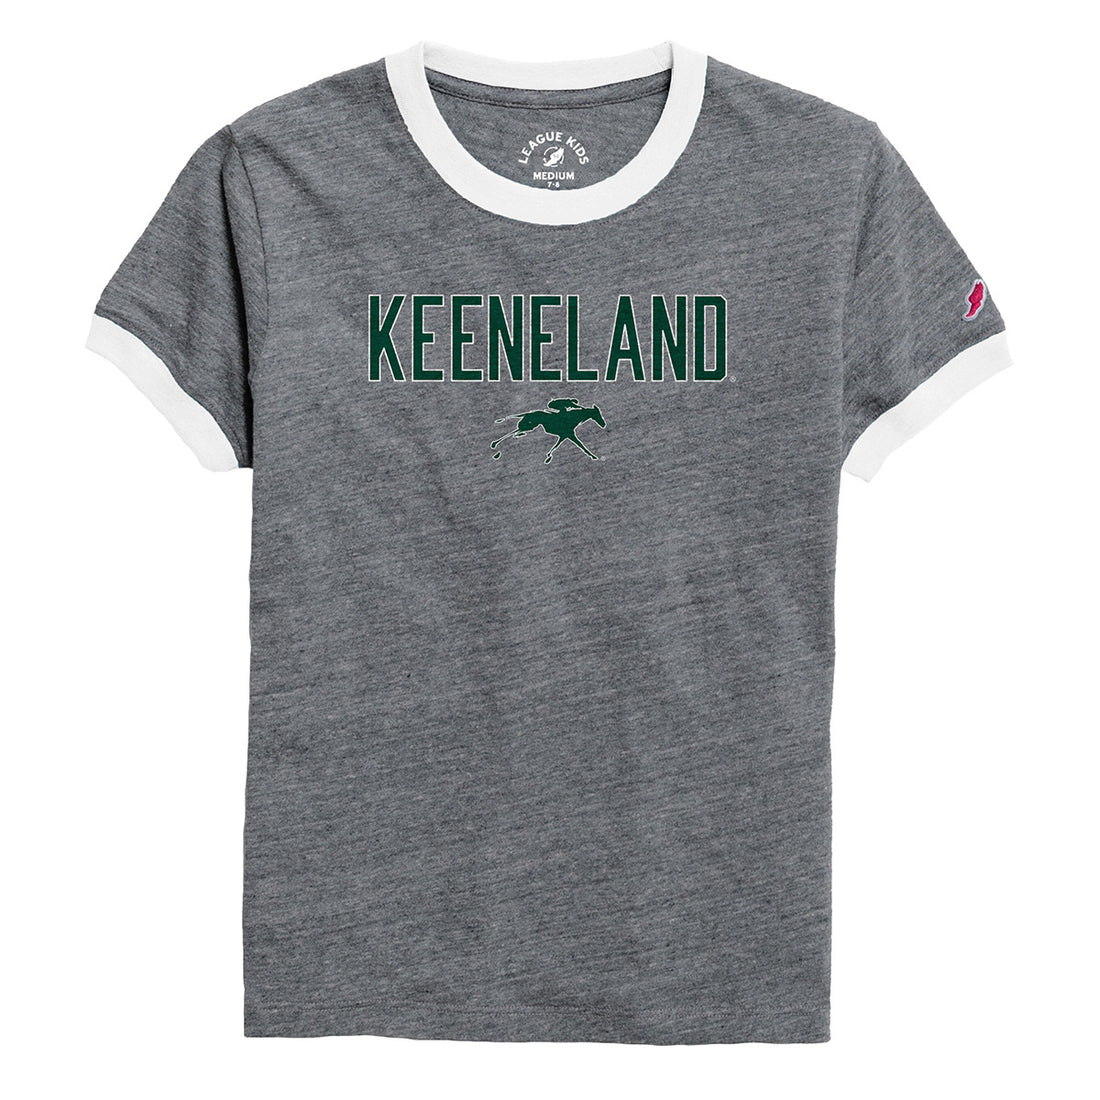 League Keeneland Youth Intramural Ringer Tee